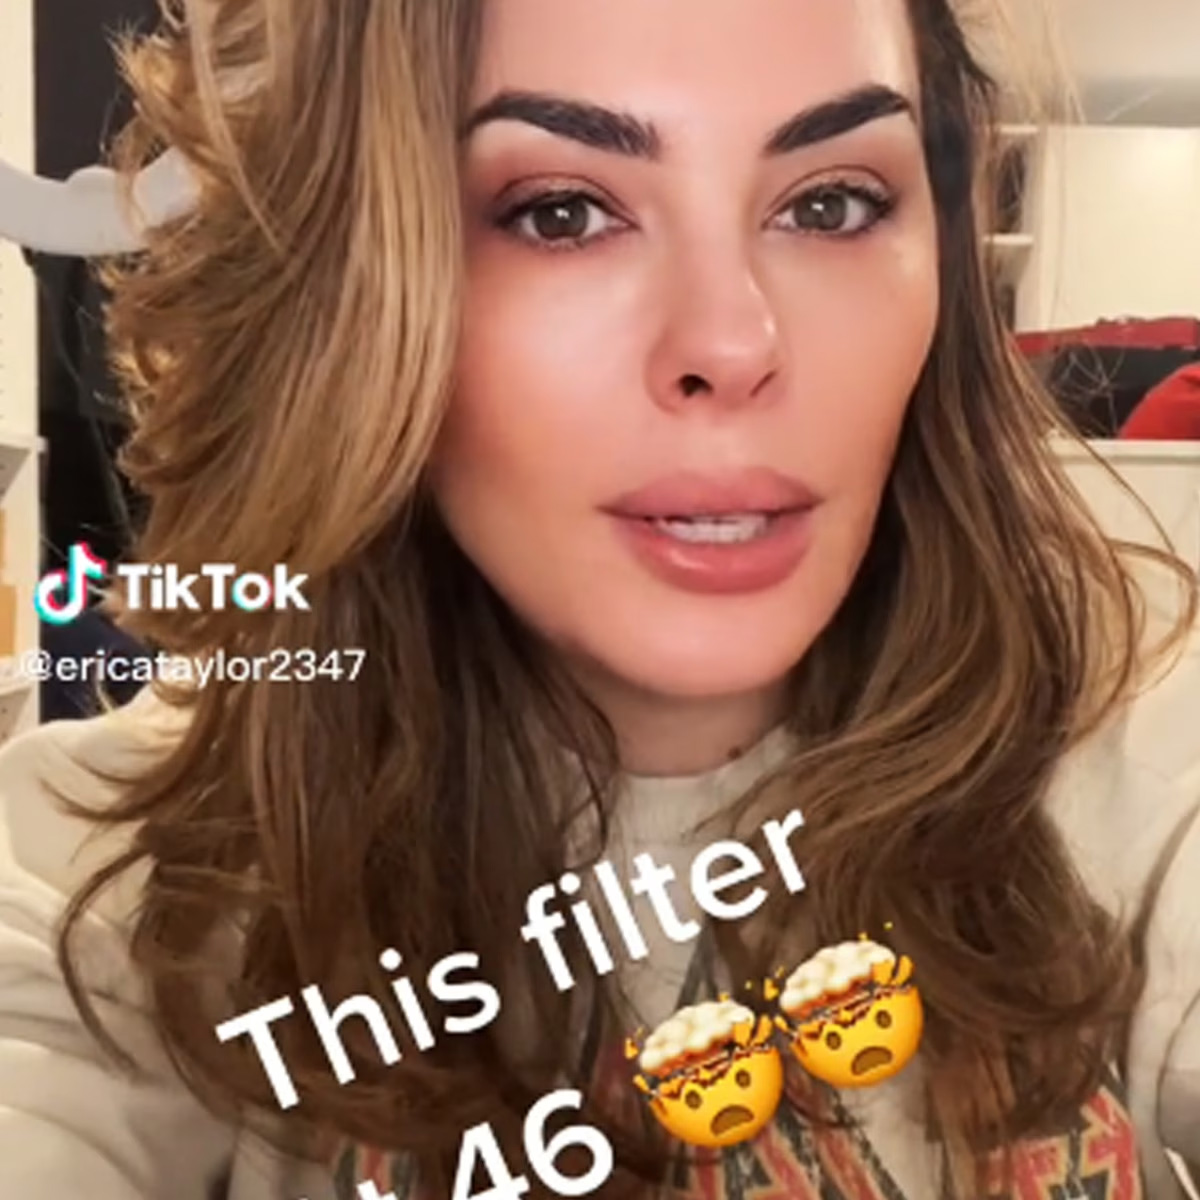 A Look At Tiktok’s Viral Bold Glamour Filter